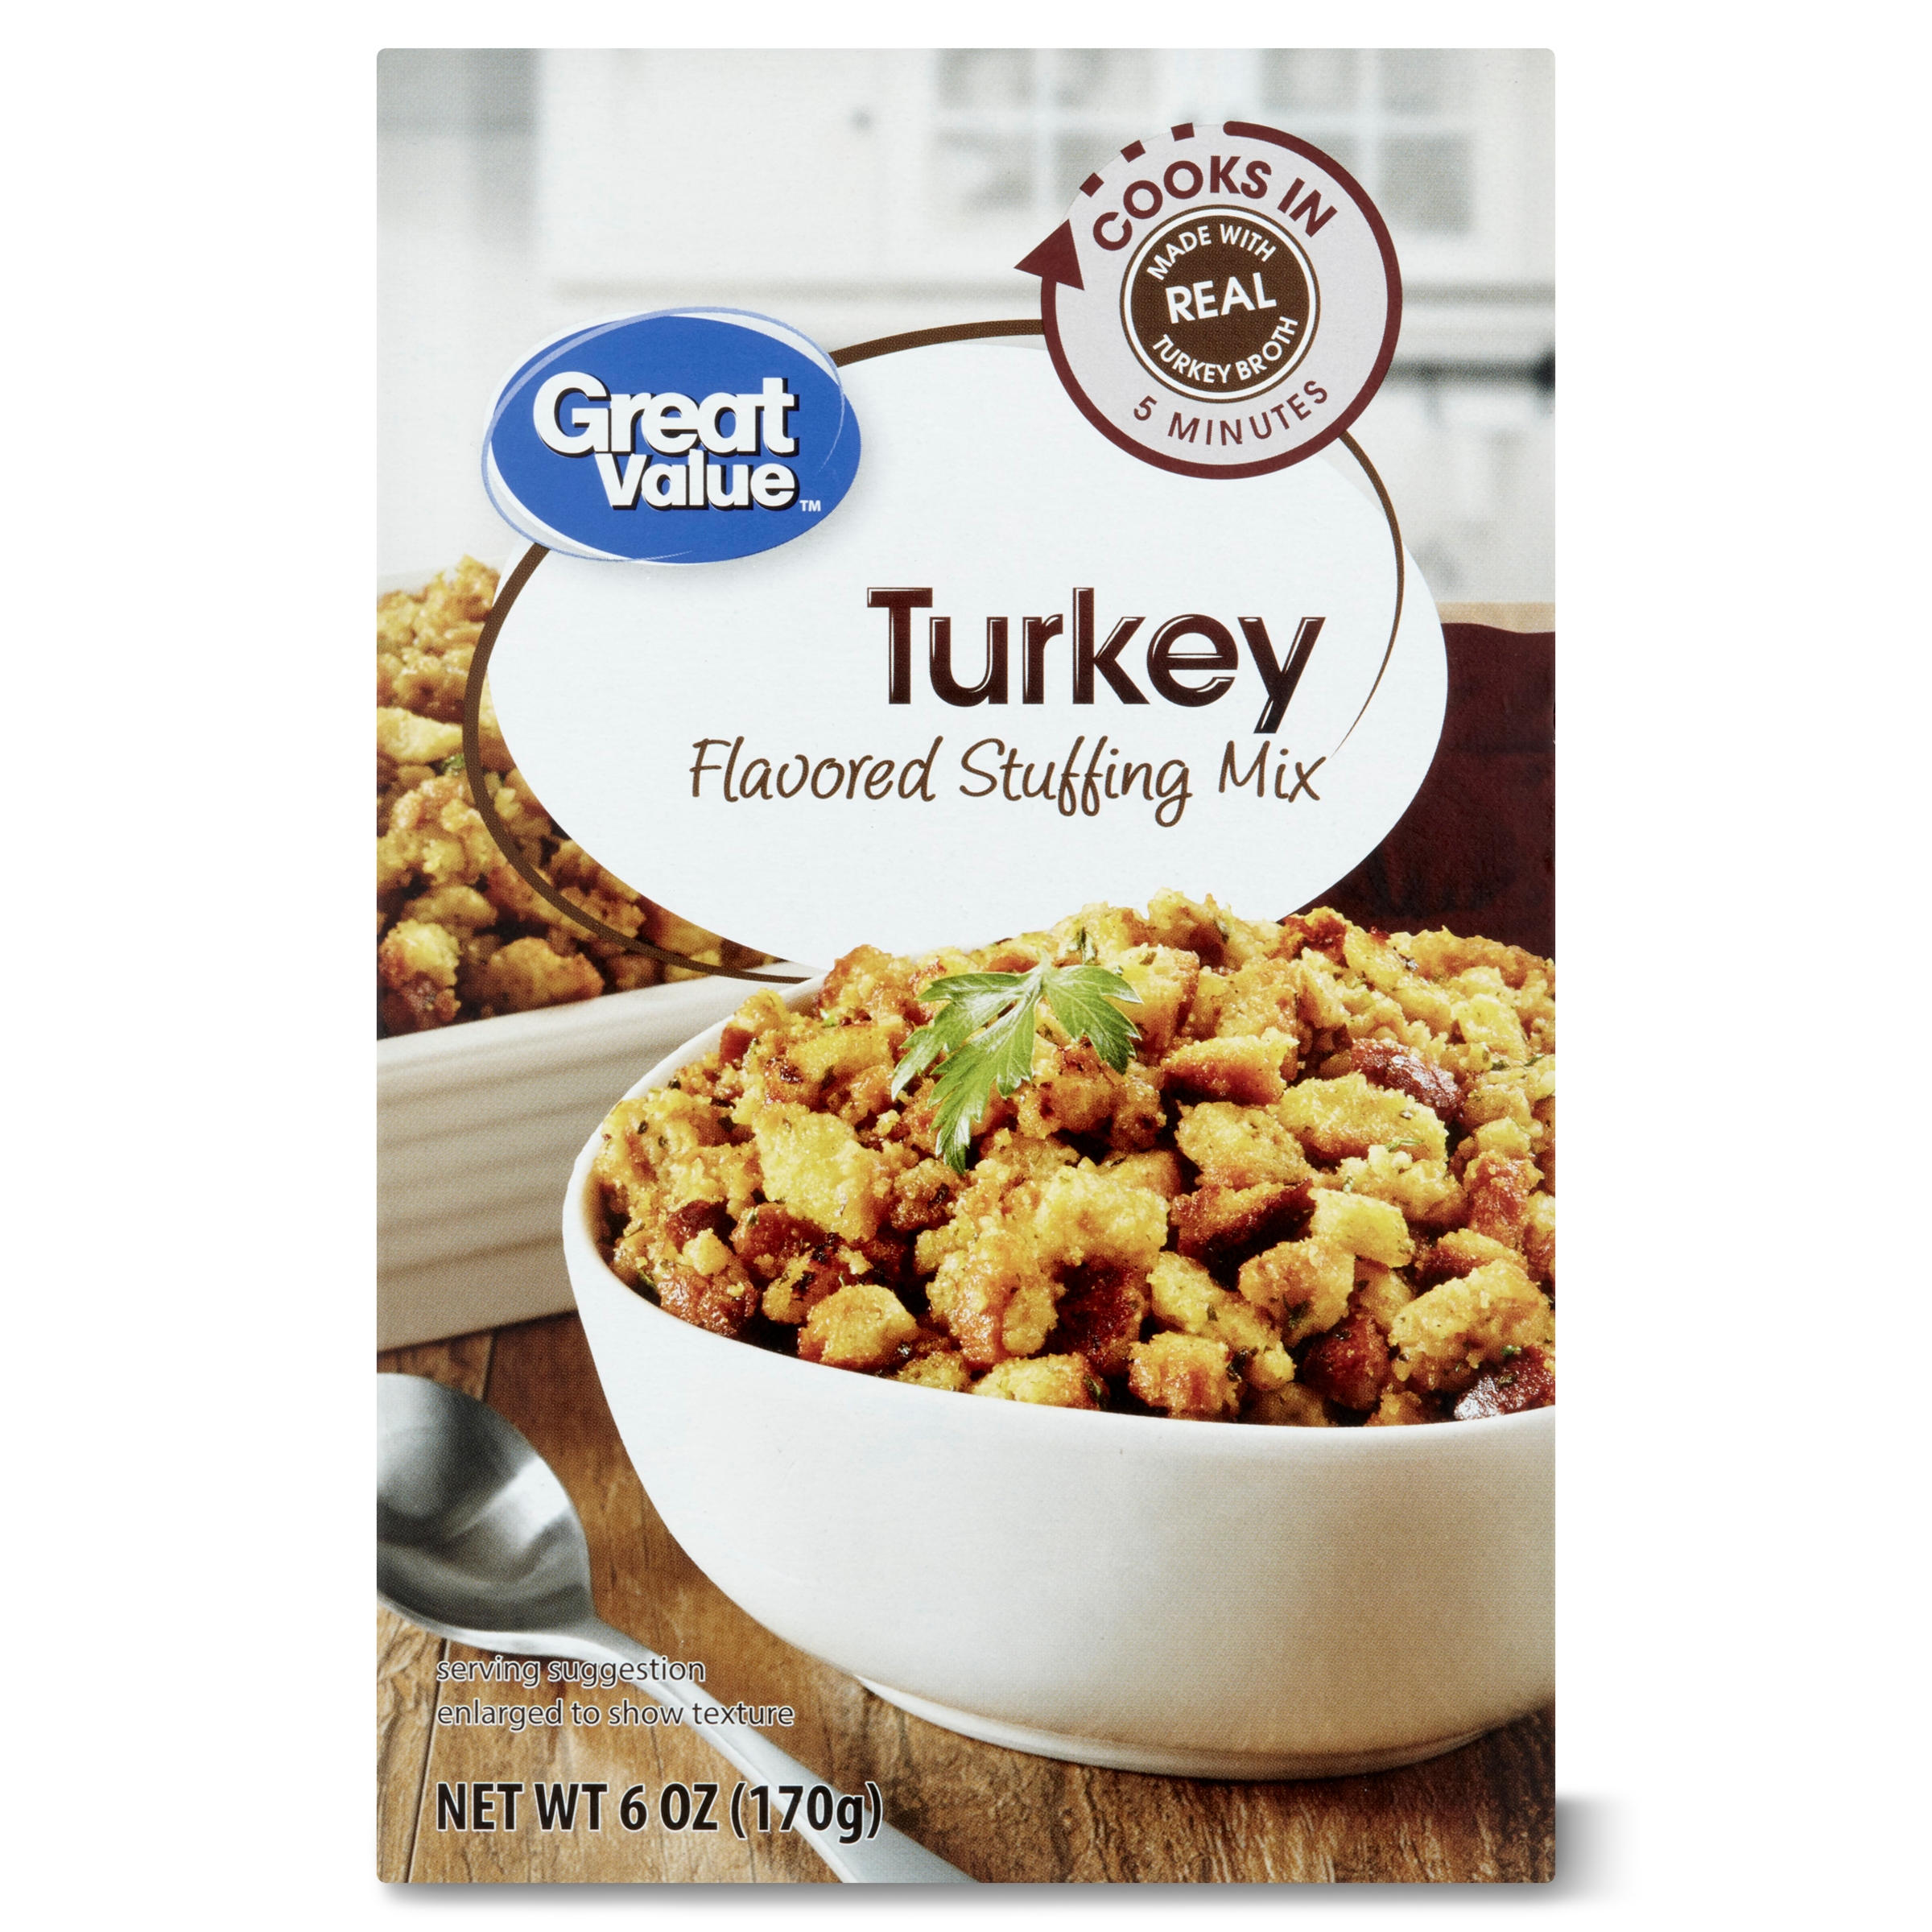 Great Value Turkey Flavored Stuffing Mix, 6 oz - image 1 of 9